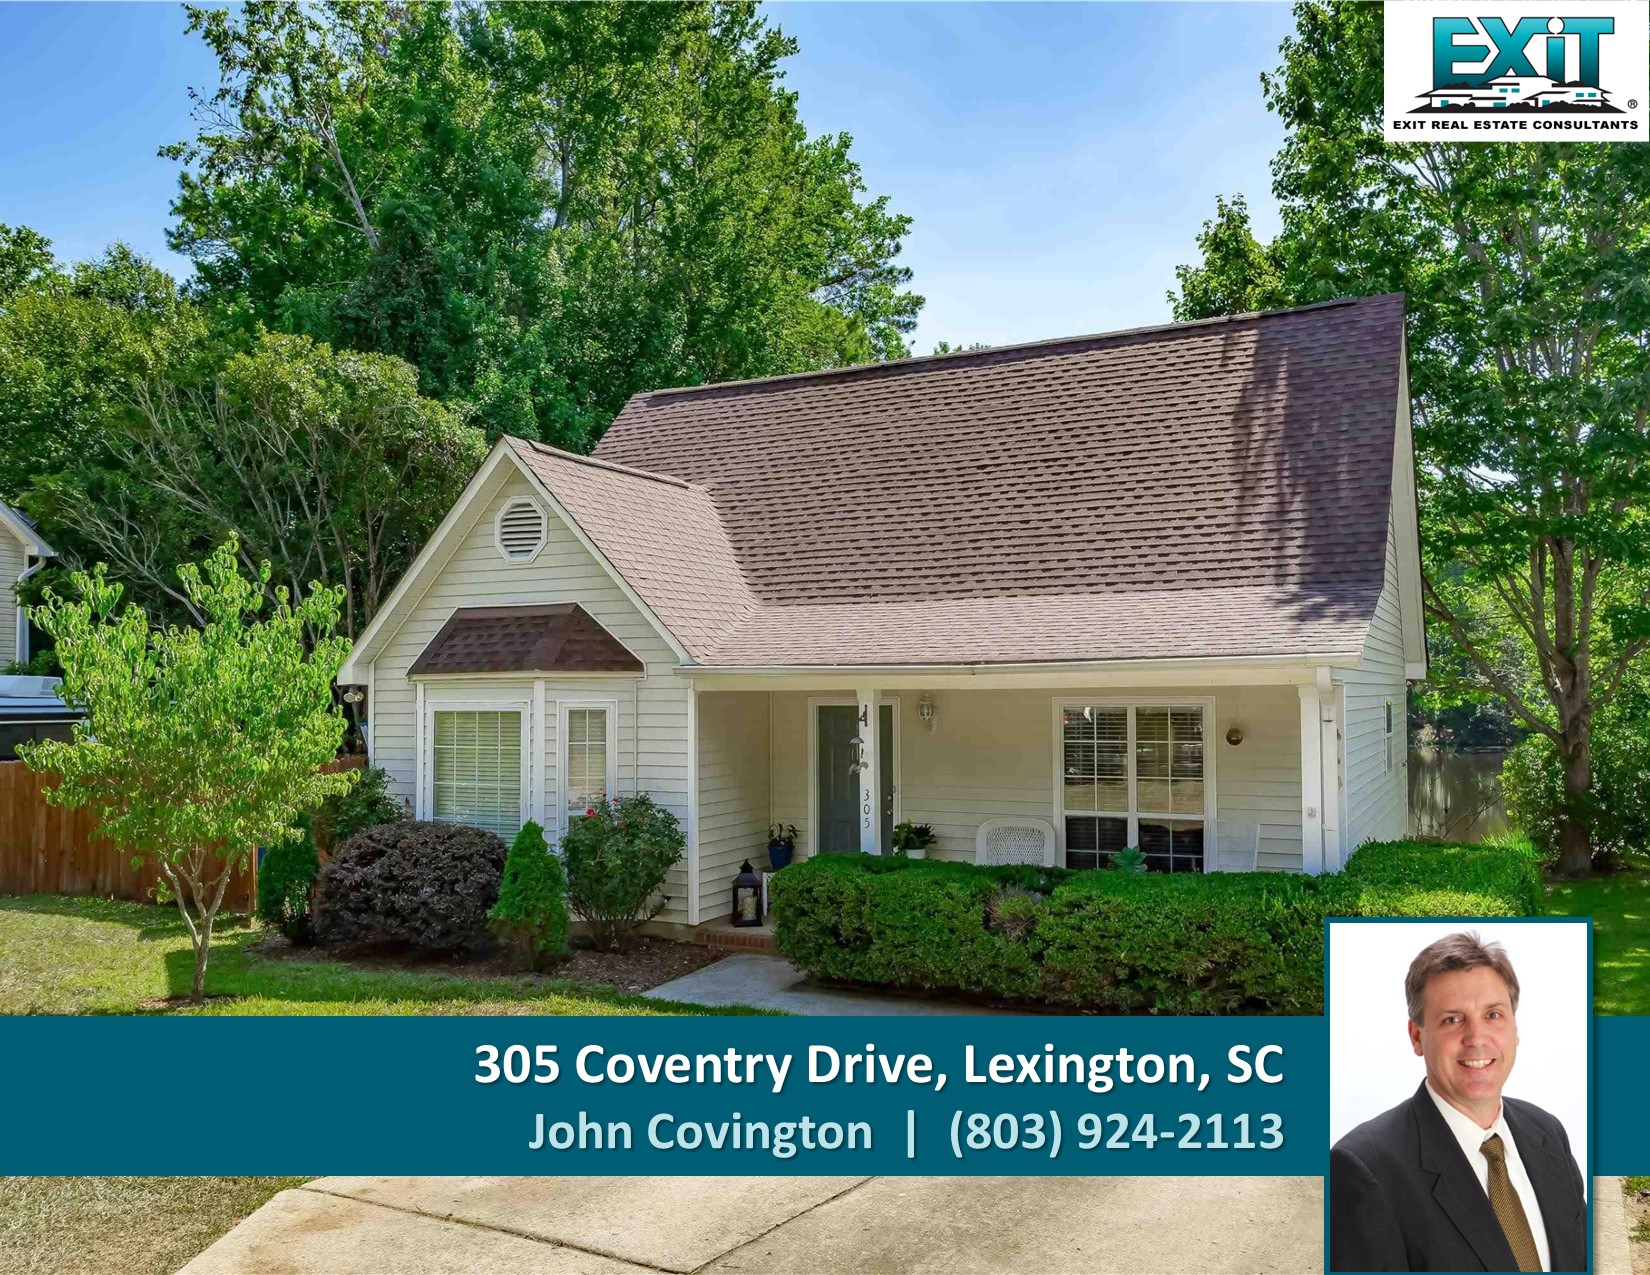 Just listed in Coventry Lakes